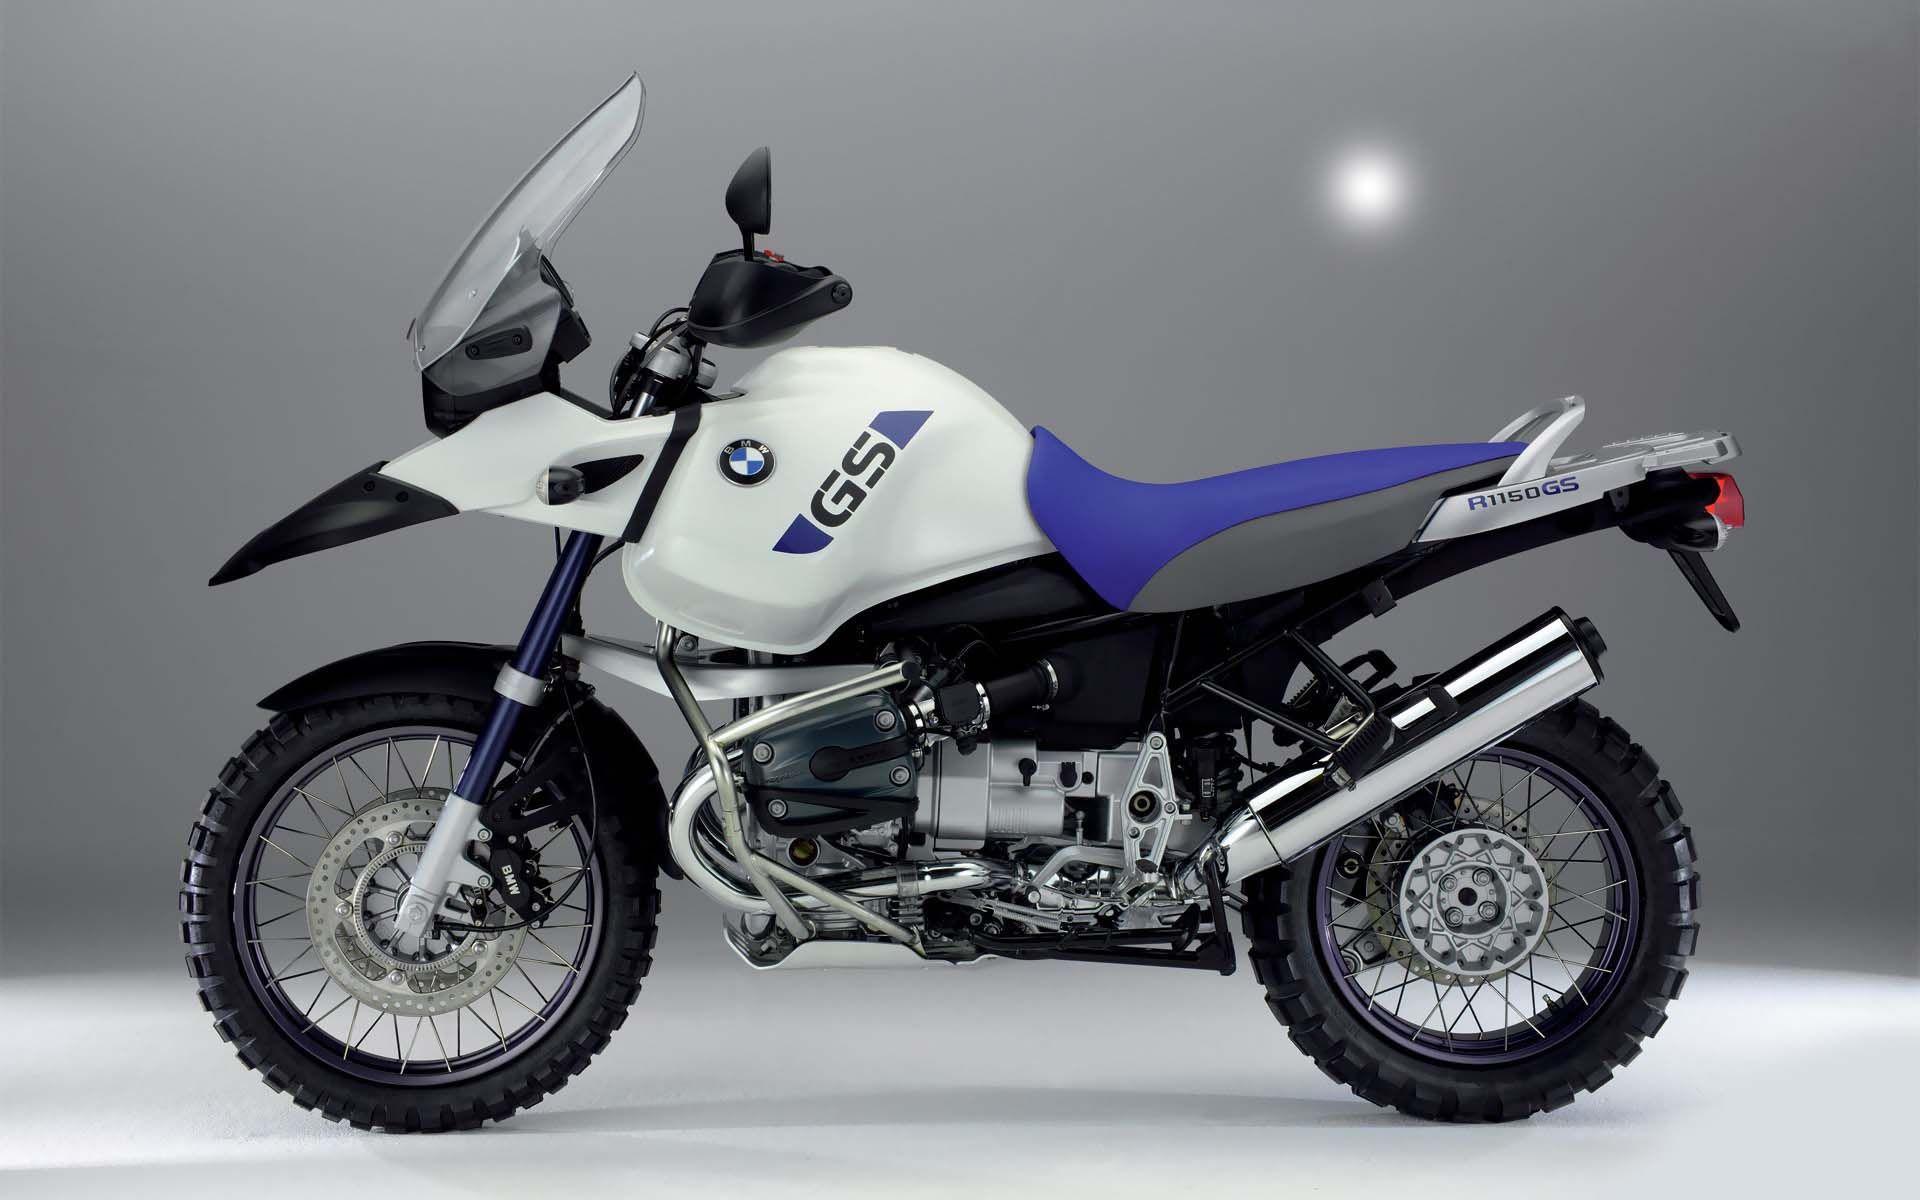 BMW R 1150 Gs Adventure. HD BMW Bikes Wallpaper for Mobile and Desktop